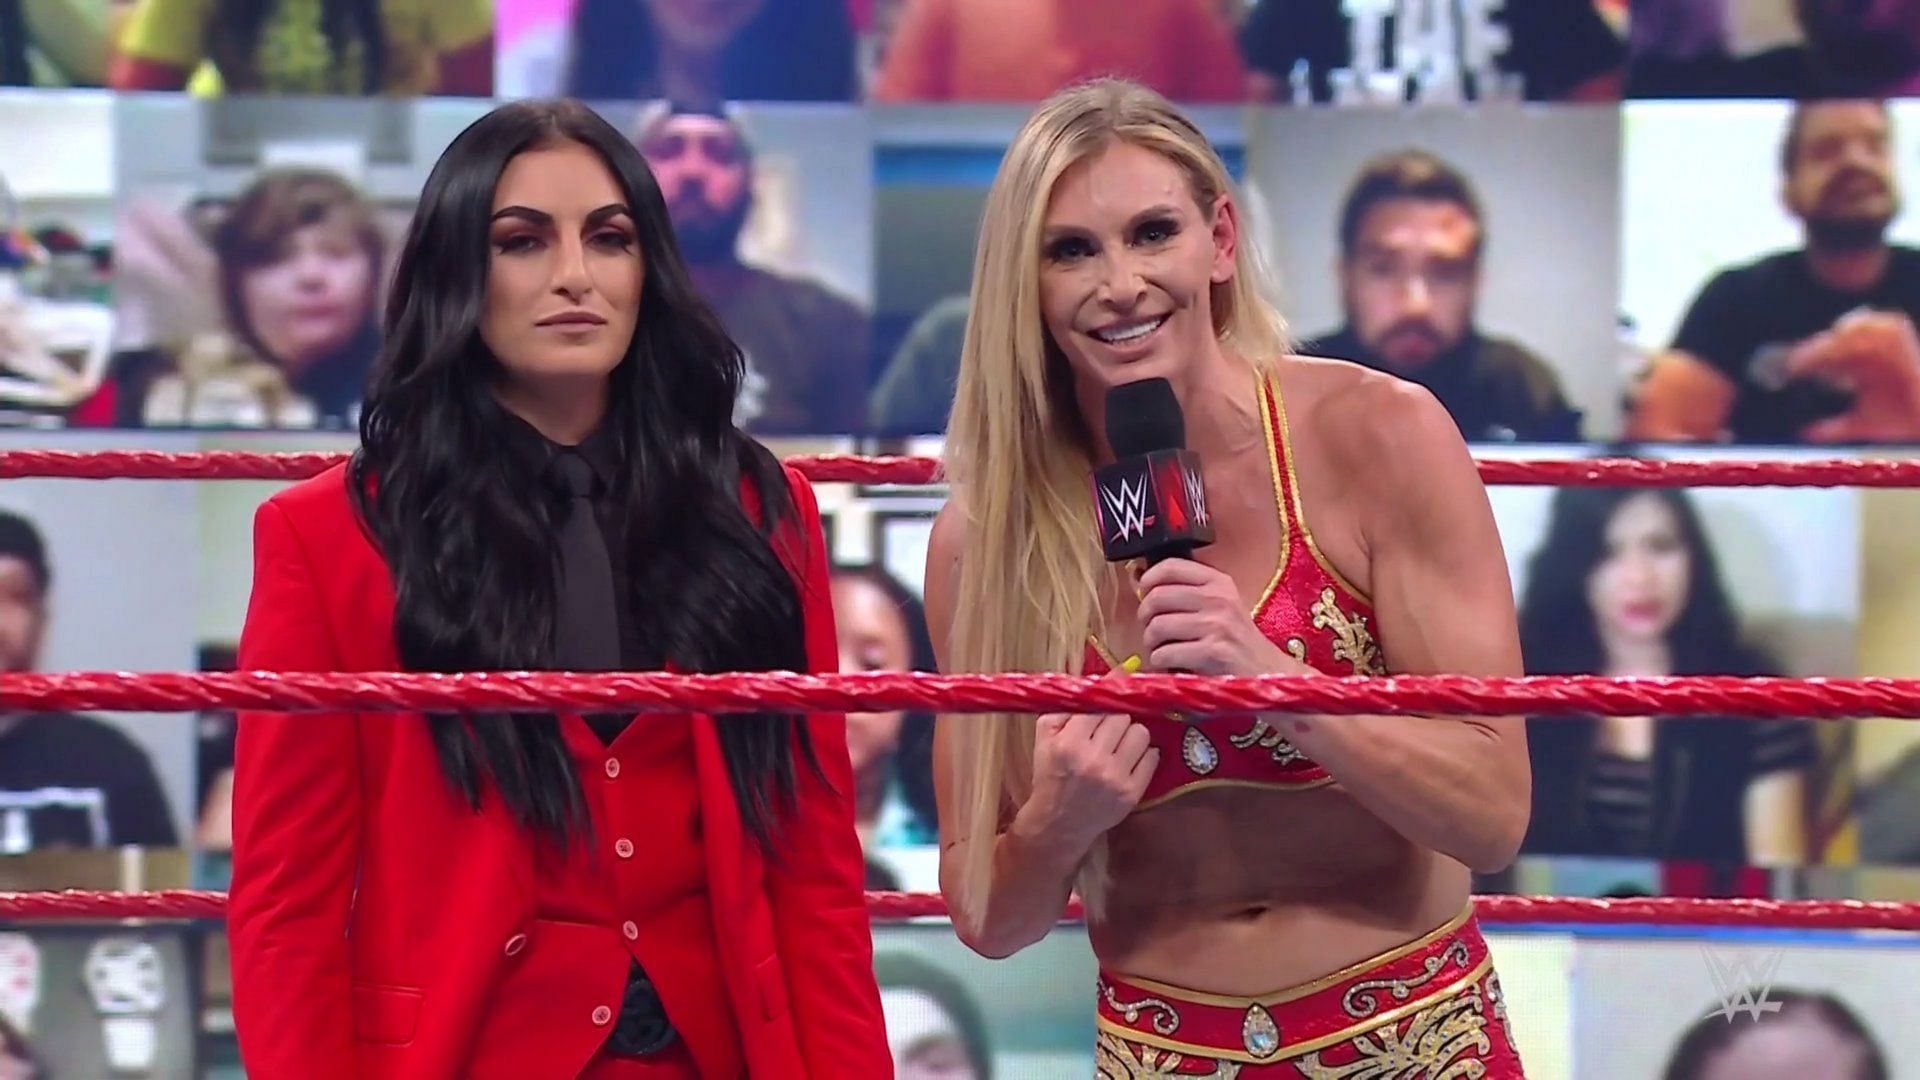 Rumors suggested that Charlotte Flair and Sonya Deville were dating in 2021